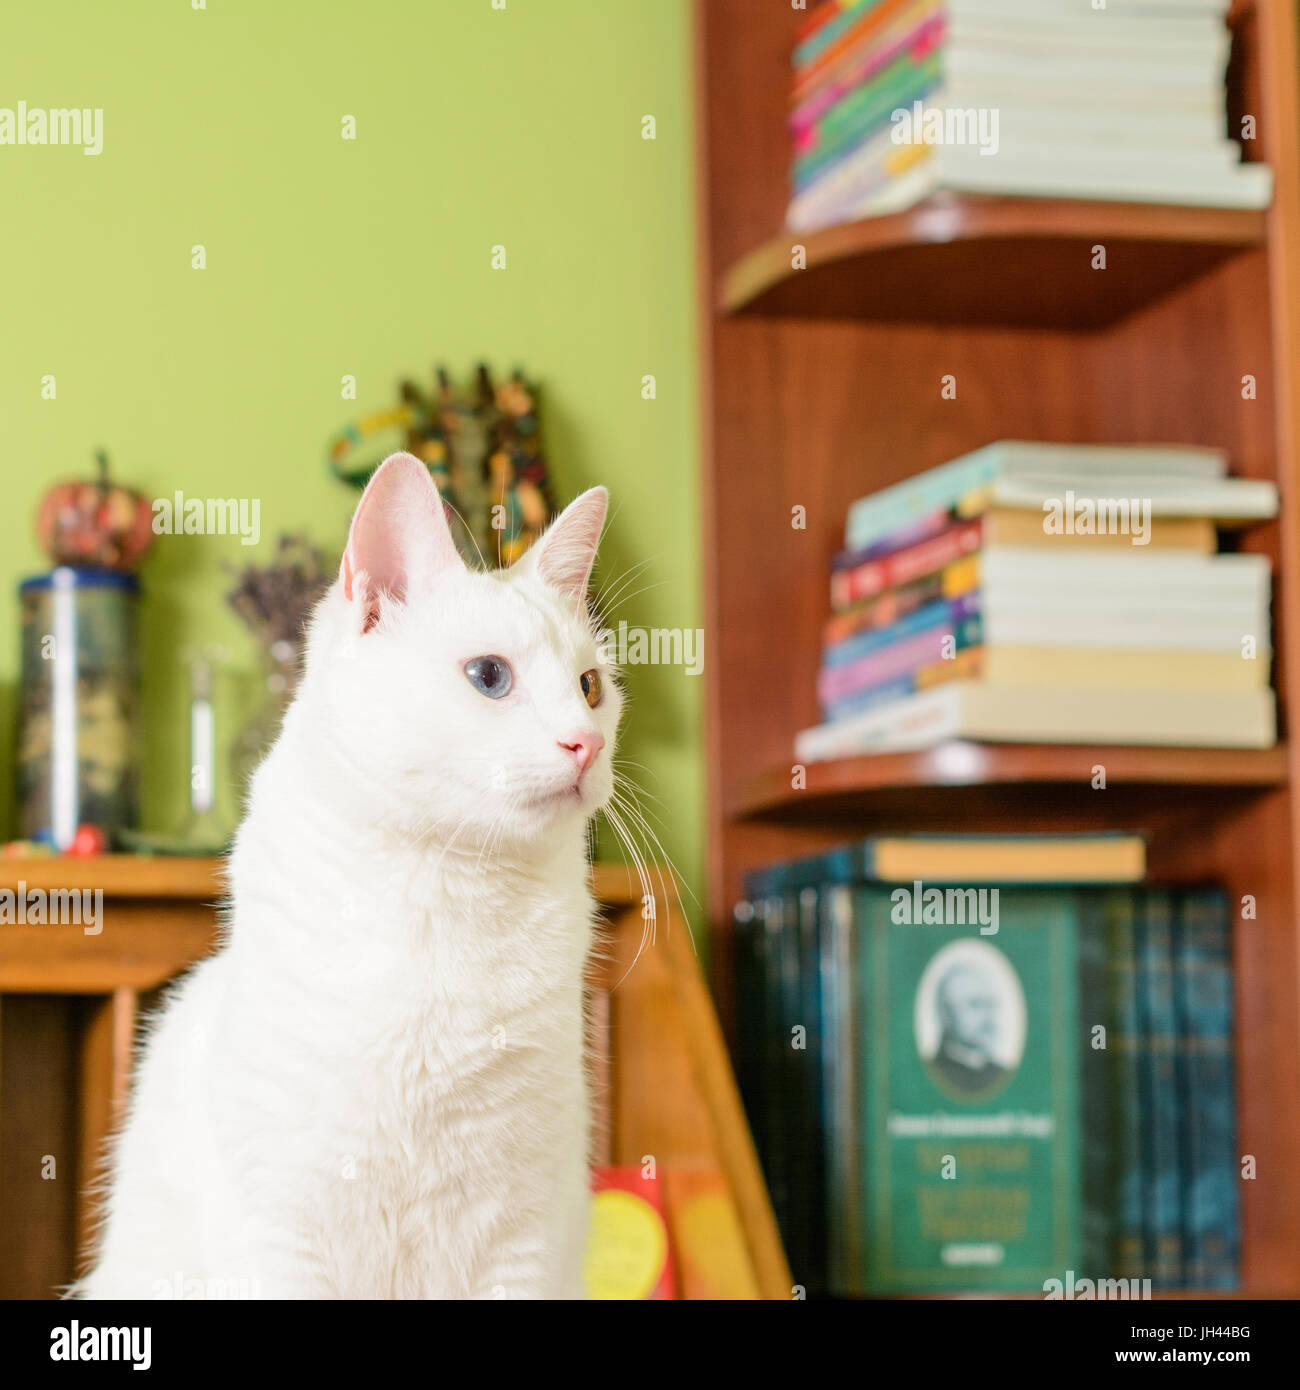 Cat sitting on the secretary table. There are books in the blurry background. Stock Photo